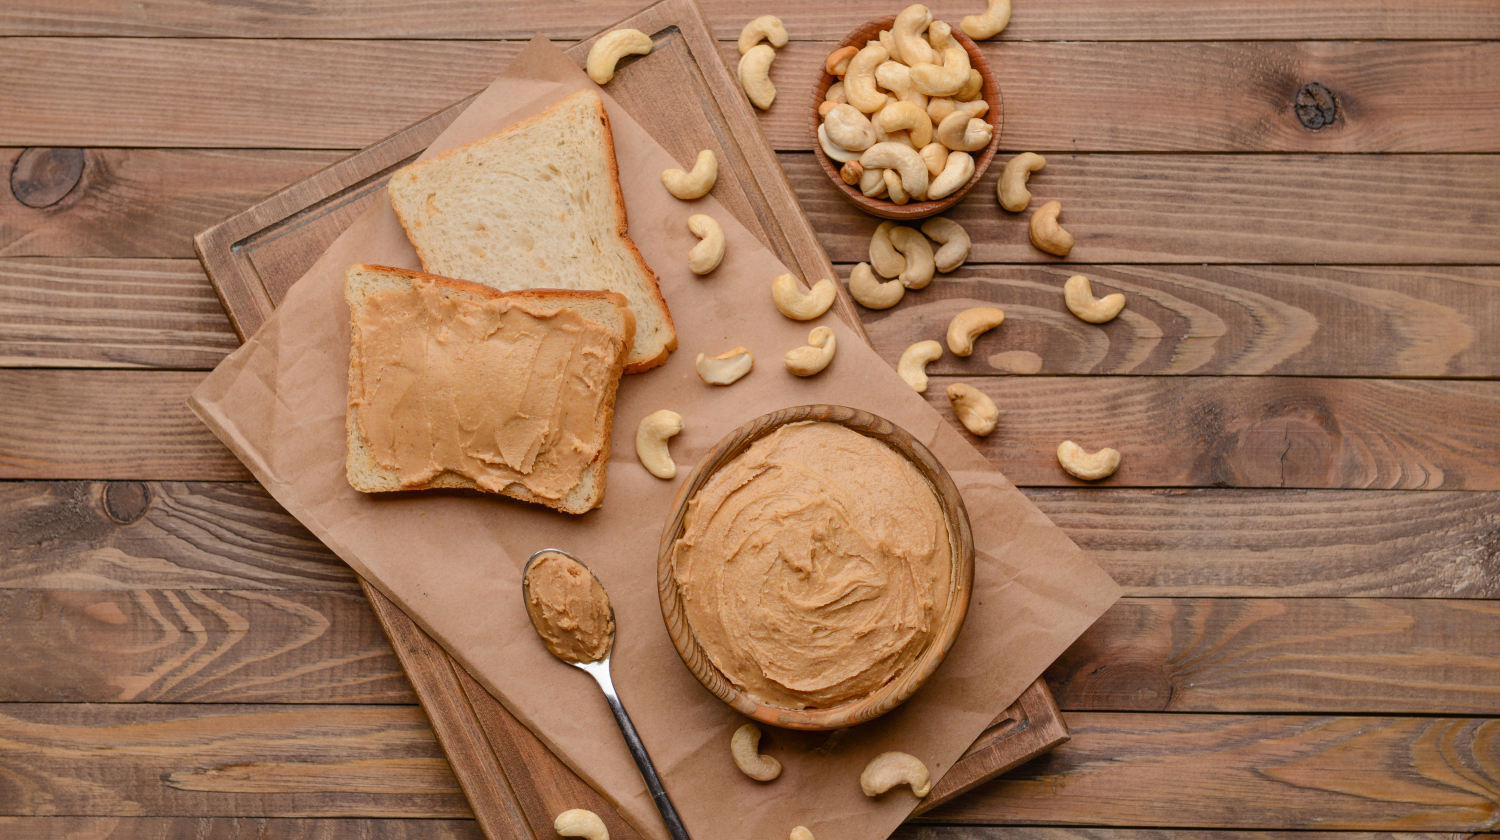 is peanut butter good for weight gain